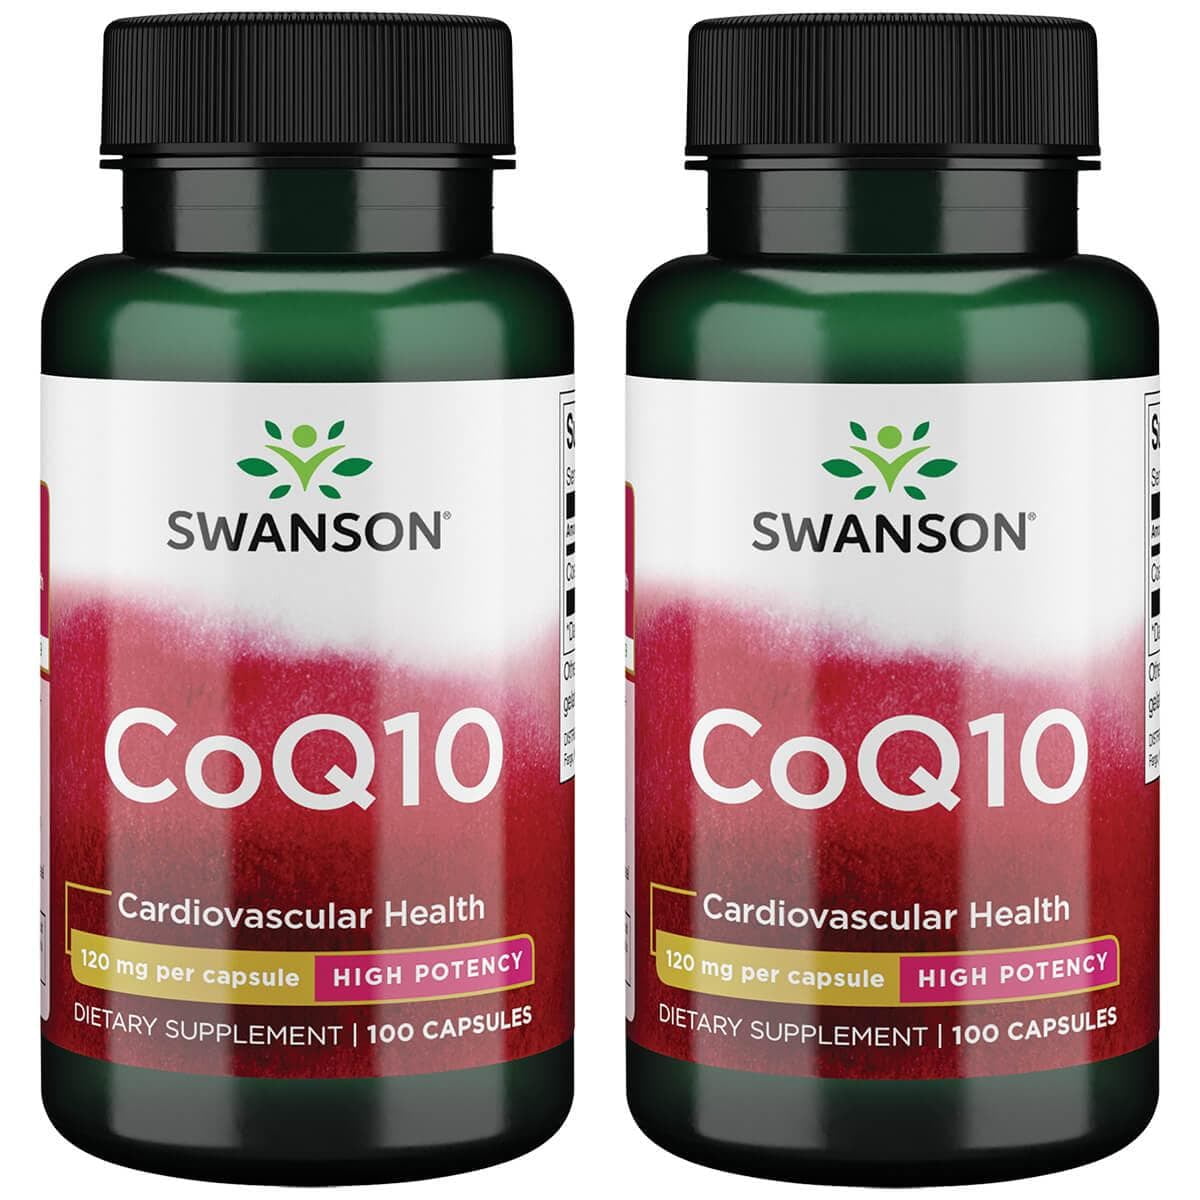 Swanson CoQ10 - Helps Promote Heart Health, Energy Support, Aids Overall Cardiovascular System Health - Helps Maintain Coenzyme Q10 Supplement - (100 Capsules, 120mg Each) - Walmart.com